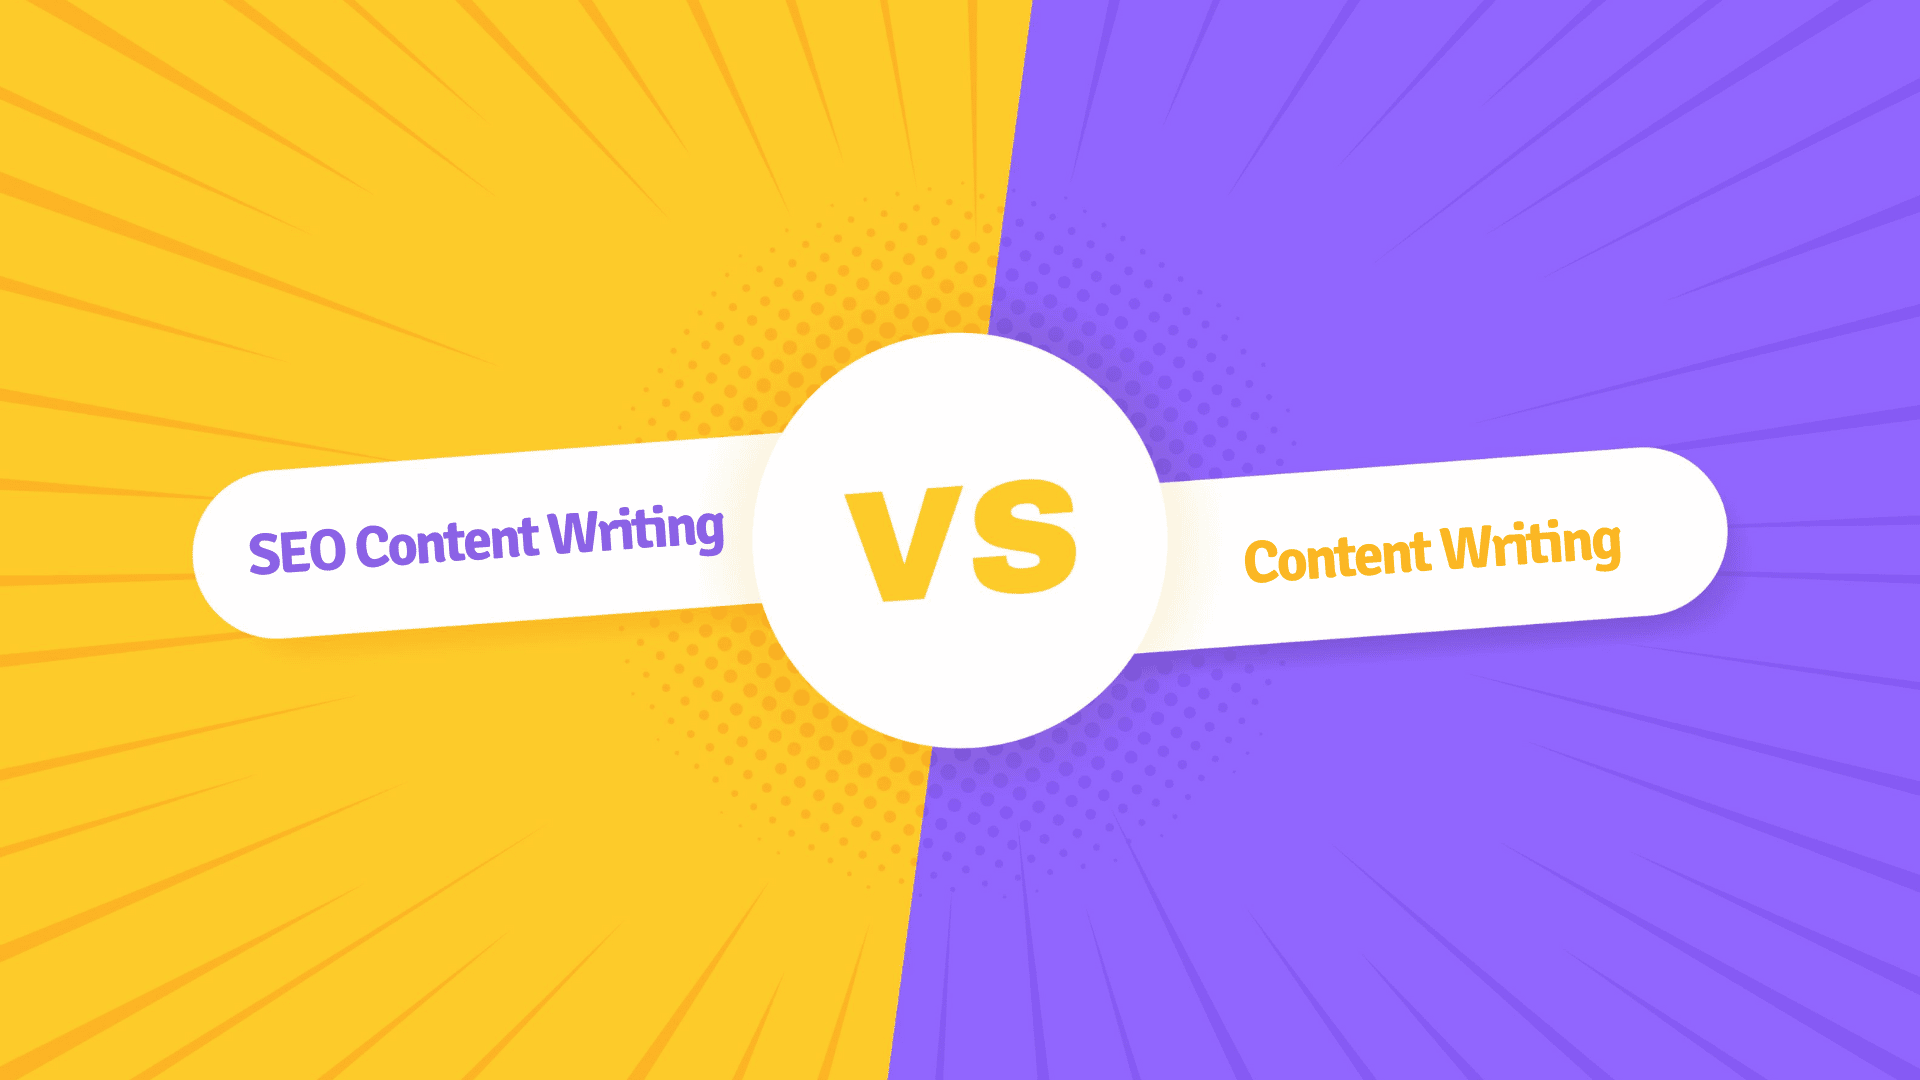 SEO content writing vs. content writing: The key difference